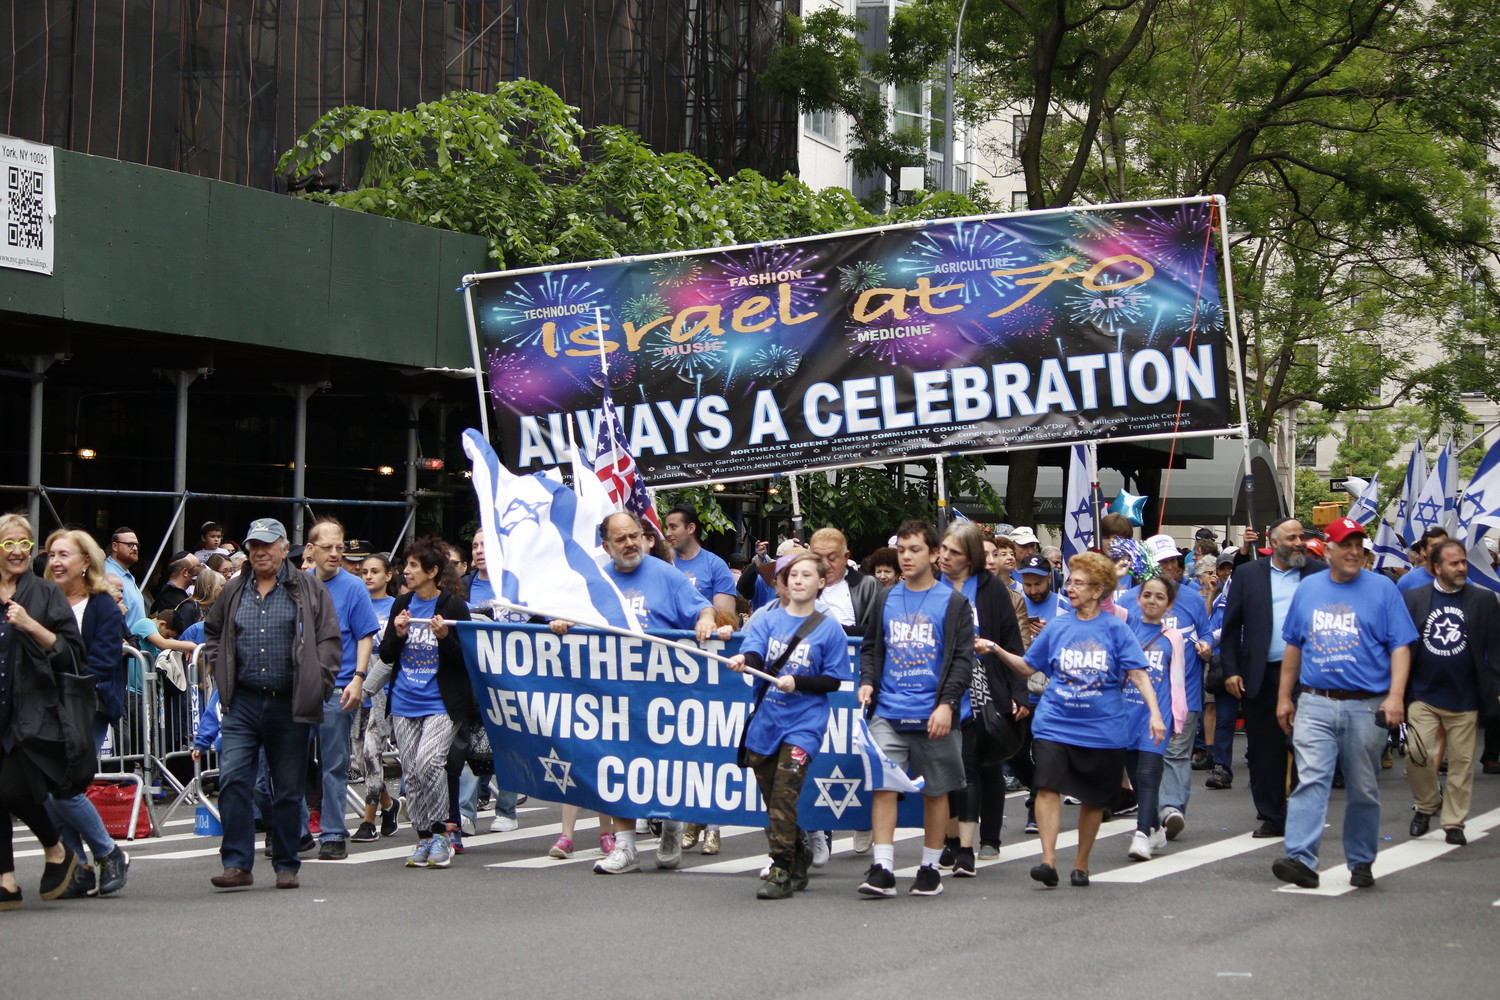 The Northeast Queens community was represented on Fifth Avenue.